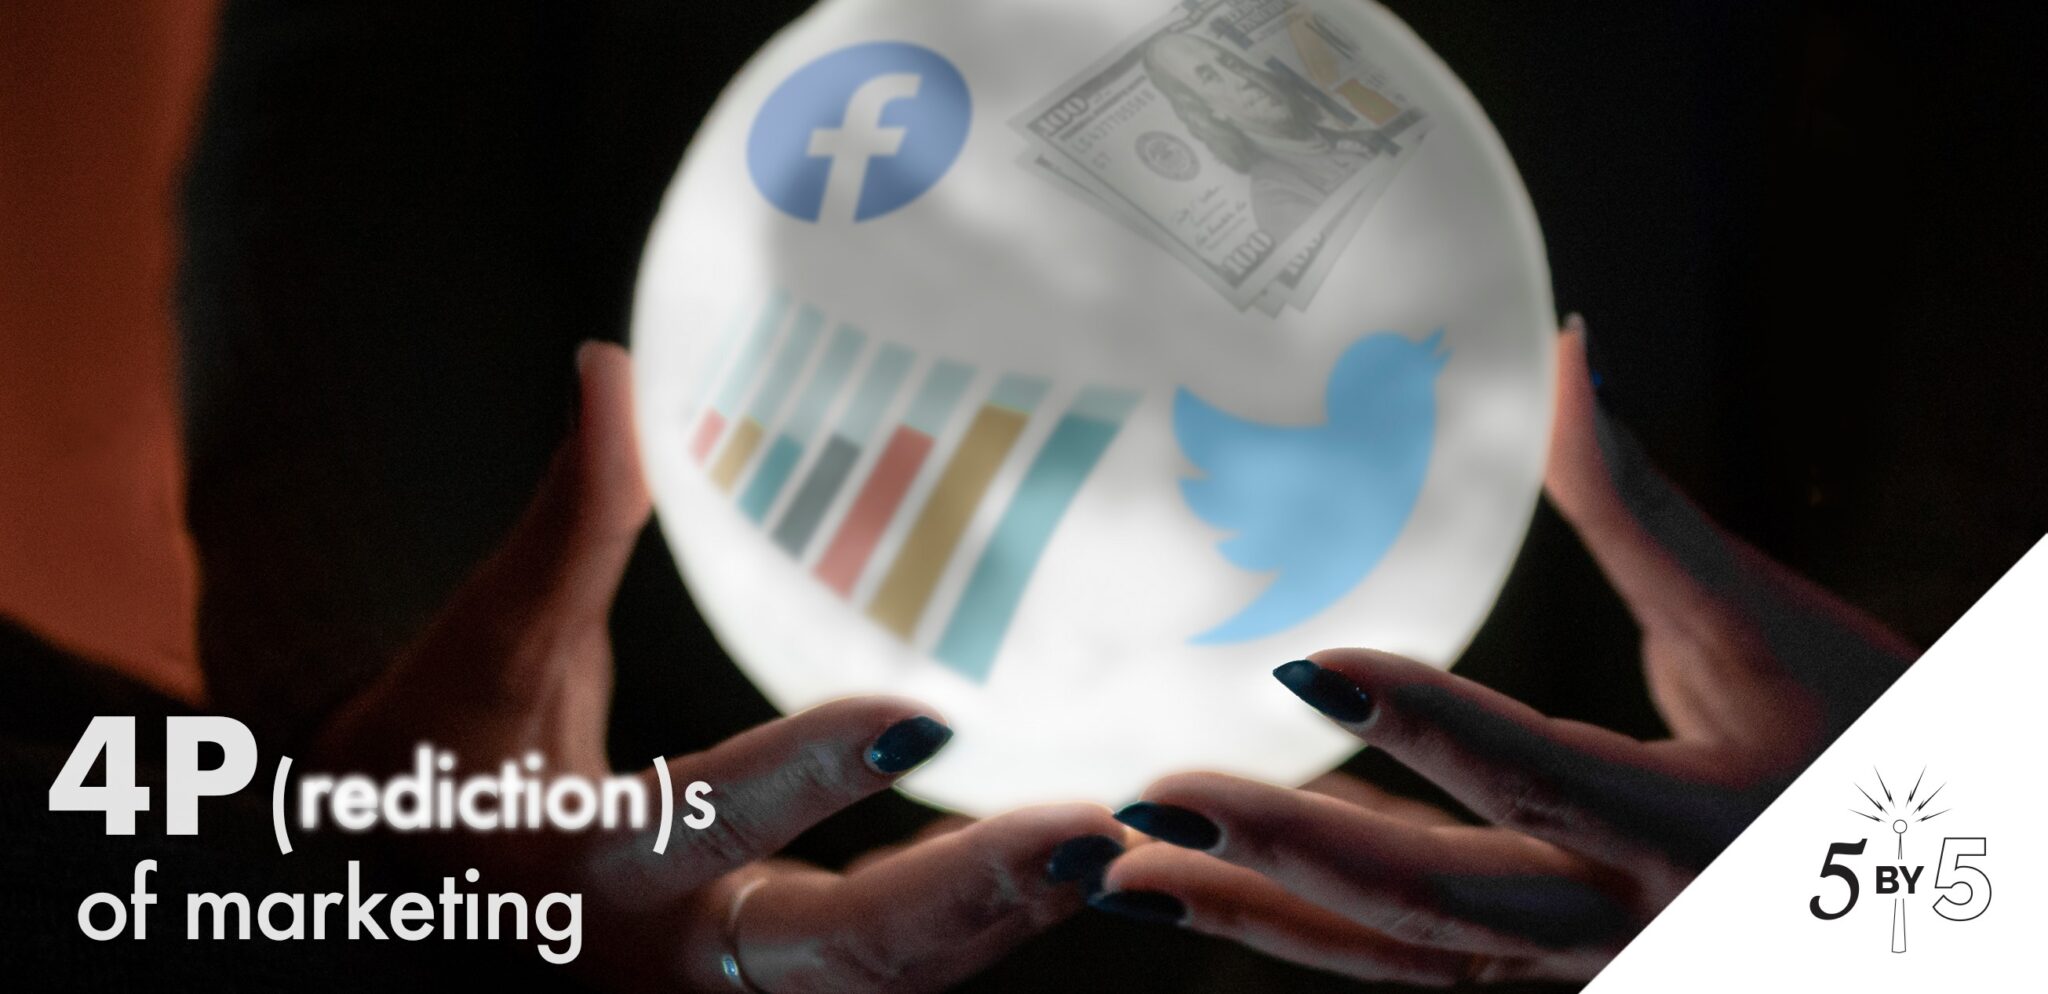 crystal ball with FB and TW logos and data graph